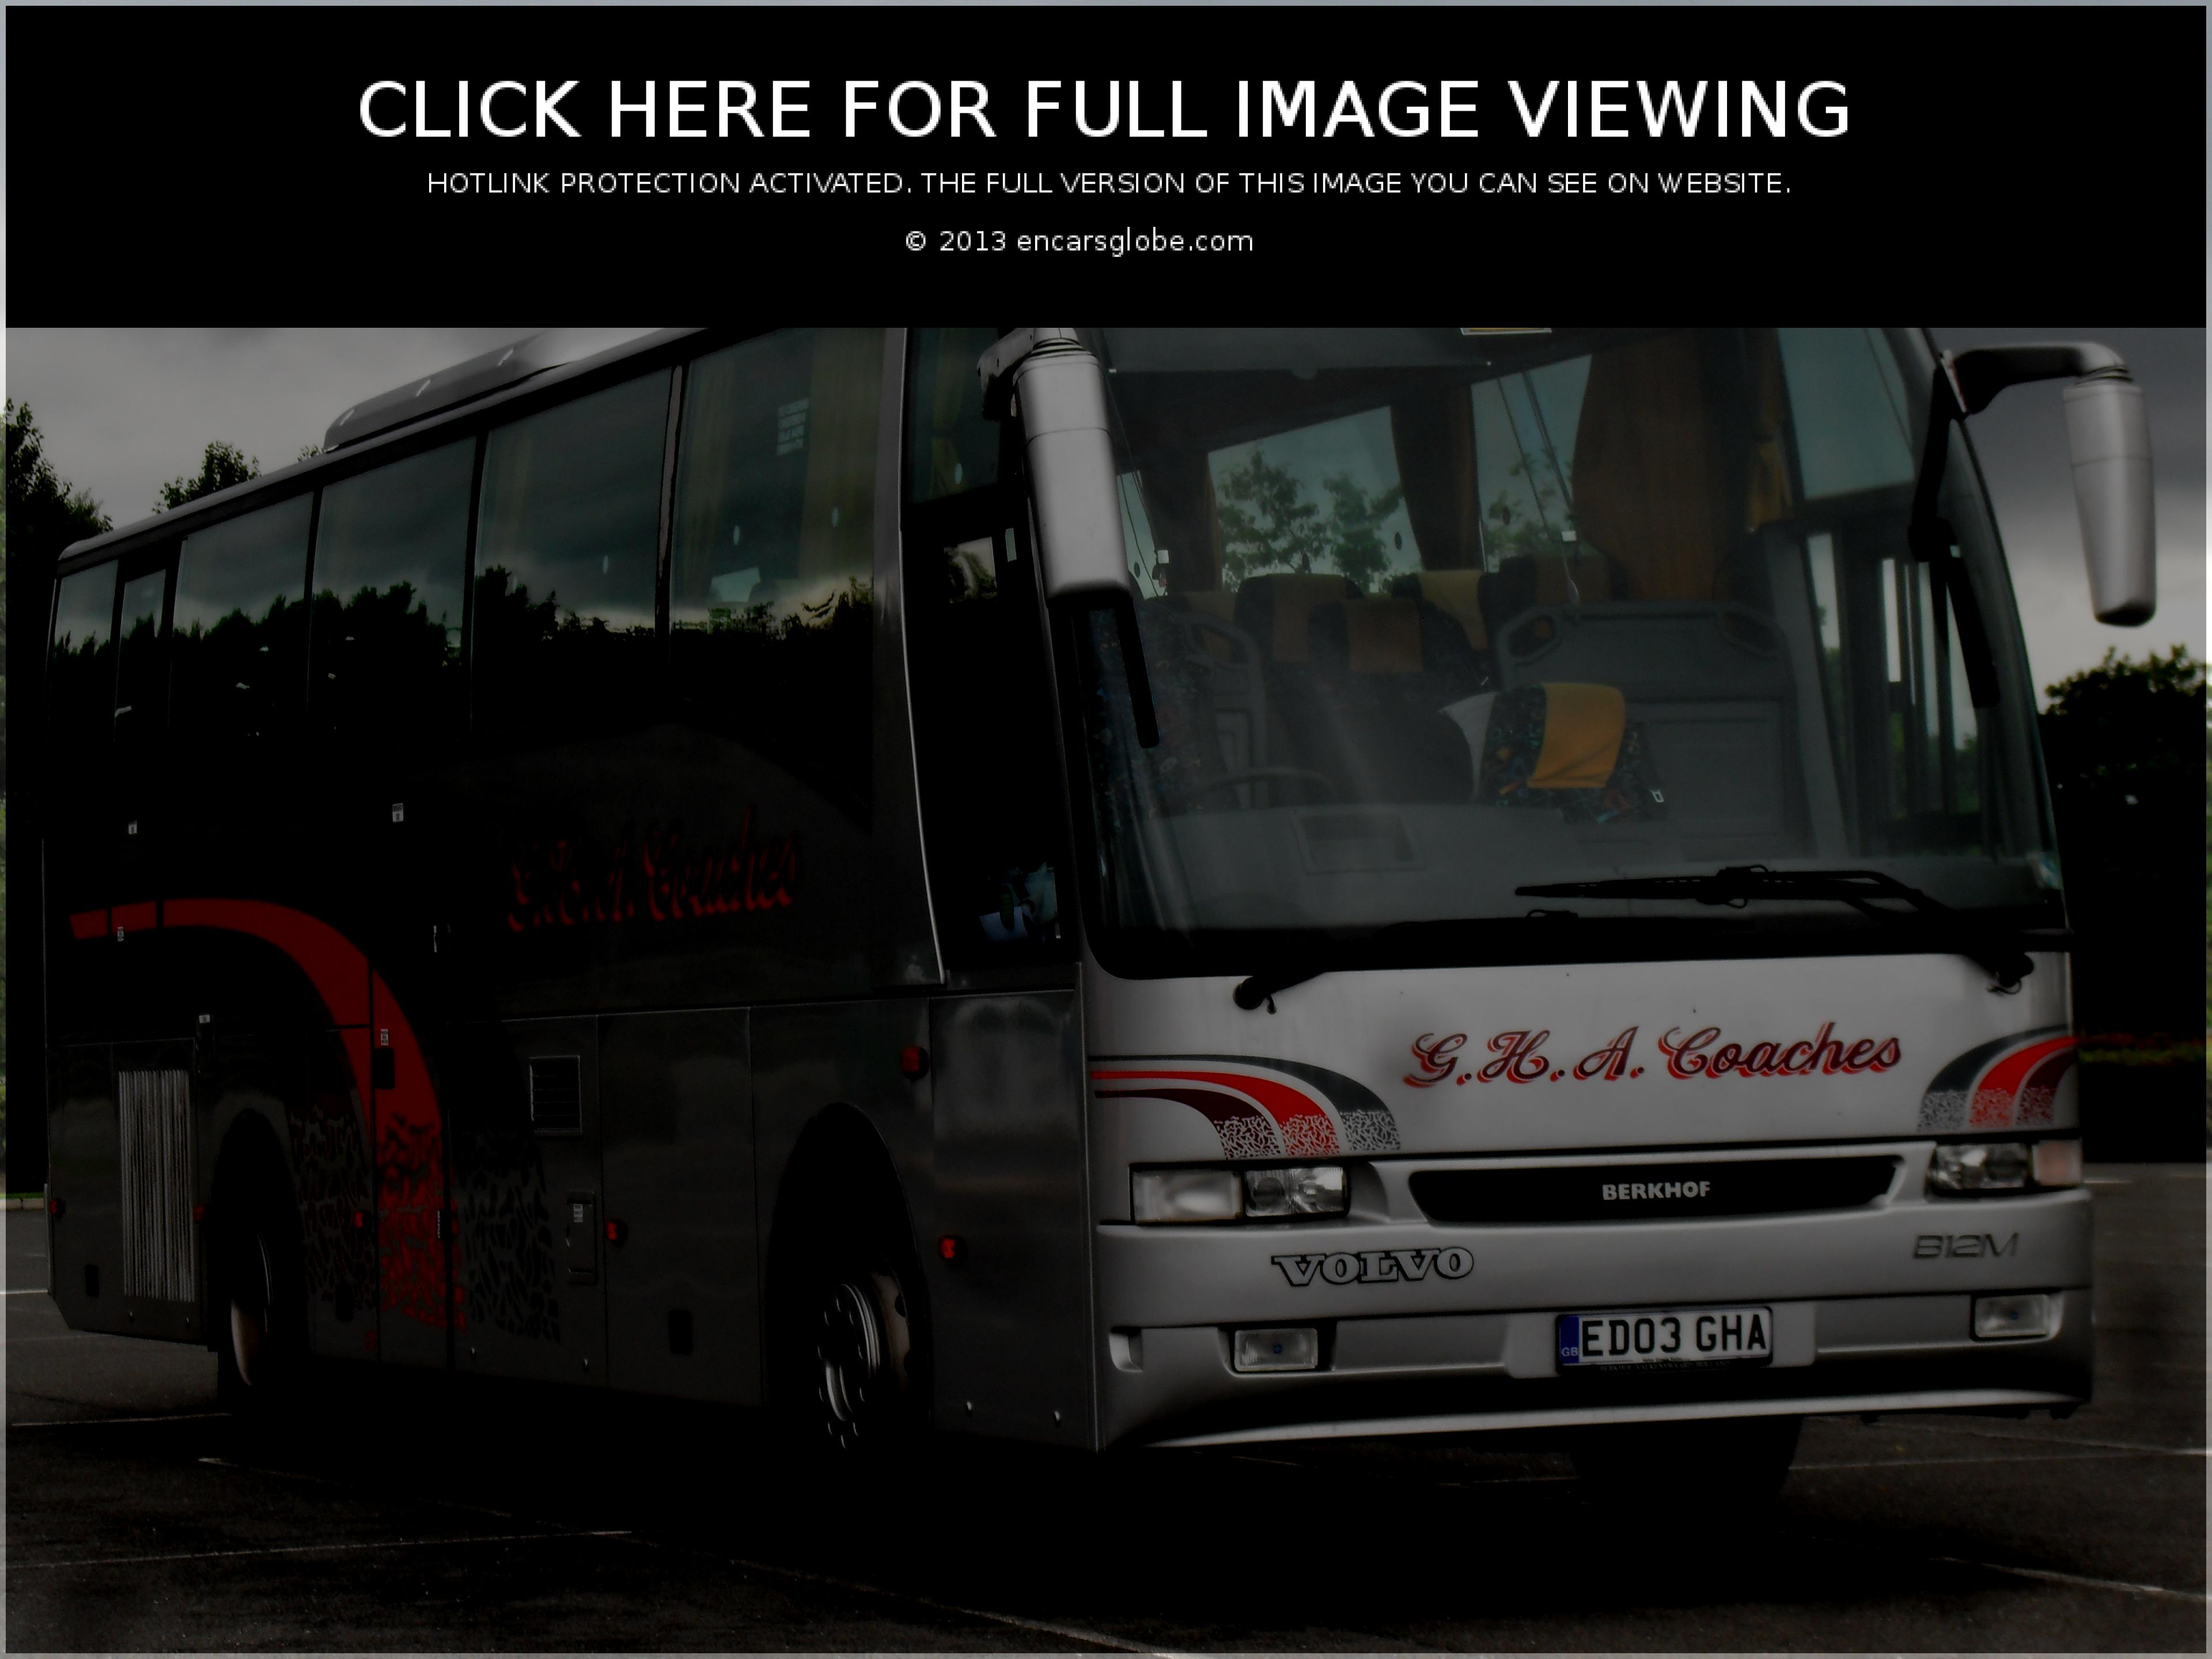 Volvo B12 M Photo Gallery: Photo #03 out of 9, Image Size - 720 x ...